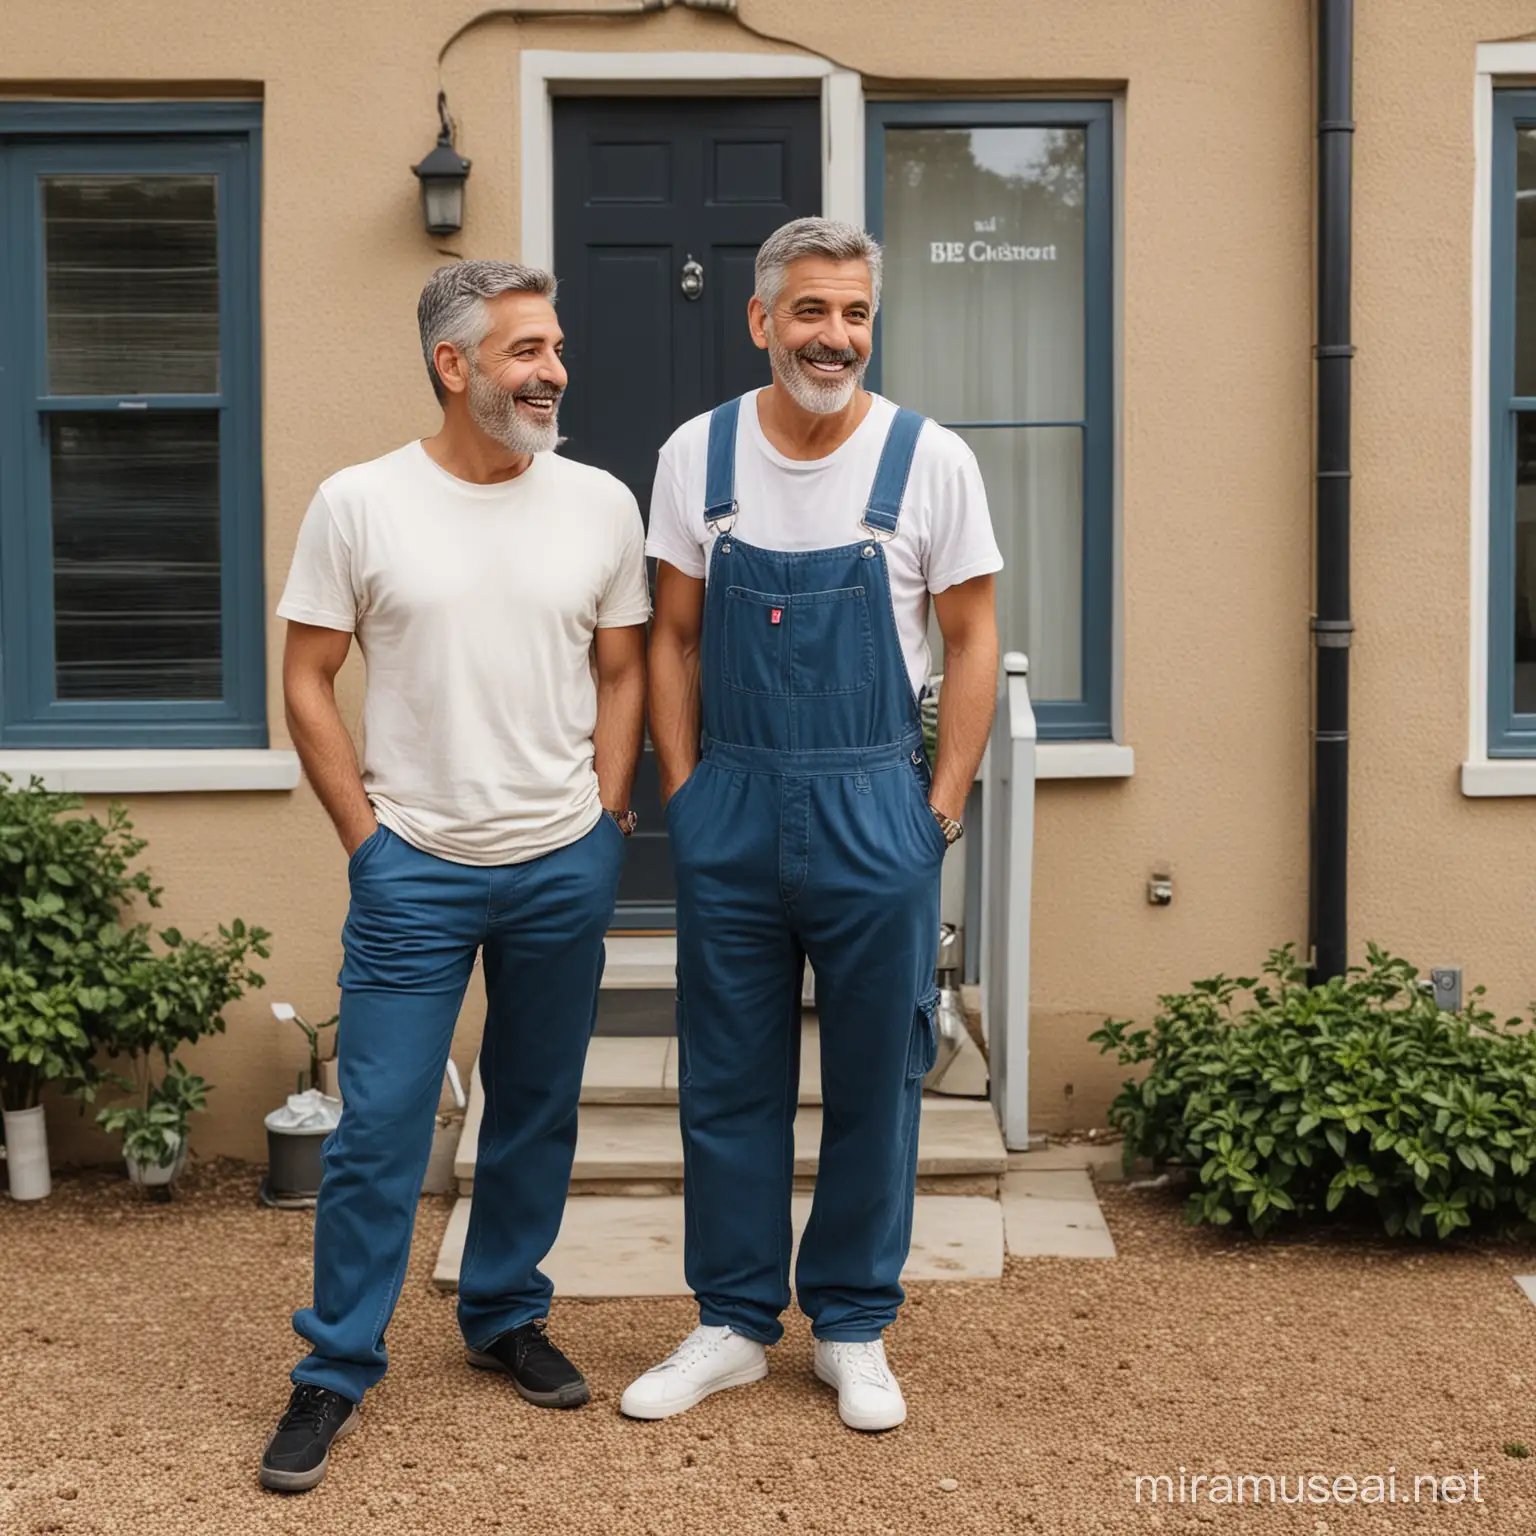 A realistic photo of two men facing each other - not as a couple, but as a customer and a gas supplier. Man number 2 is in the house coming out of the front door and man number 1 is in the yard of the house slightly behind. Both men are full-length. Man number 1 is on the outside of the house, his face is beardless, his hair is dark brown and he is wearing a blue overall, and man number 2 is wearing brown sweatpants and a white t-shirt, a white beard, about 55 years old, and he is smiling happily , man number 2 looks a bit like George Clooney.
